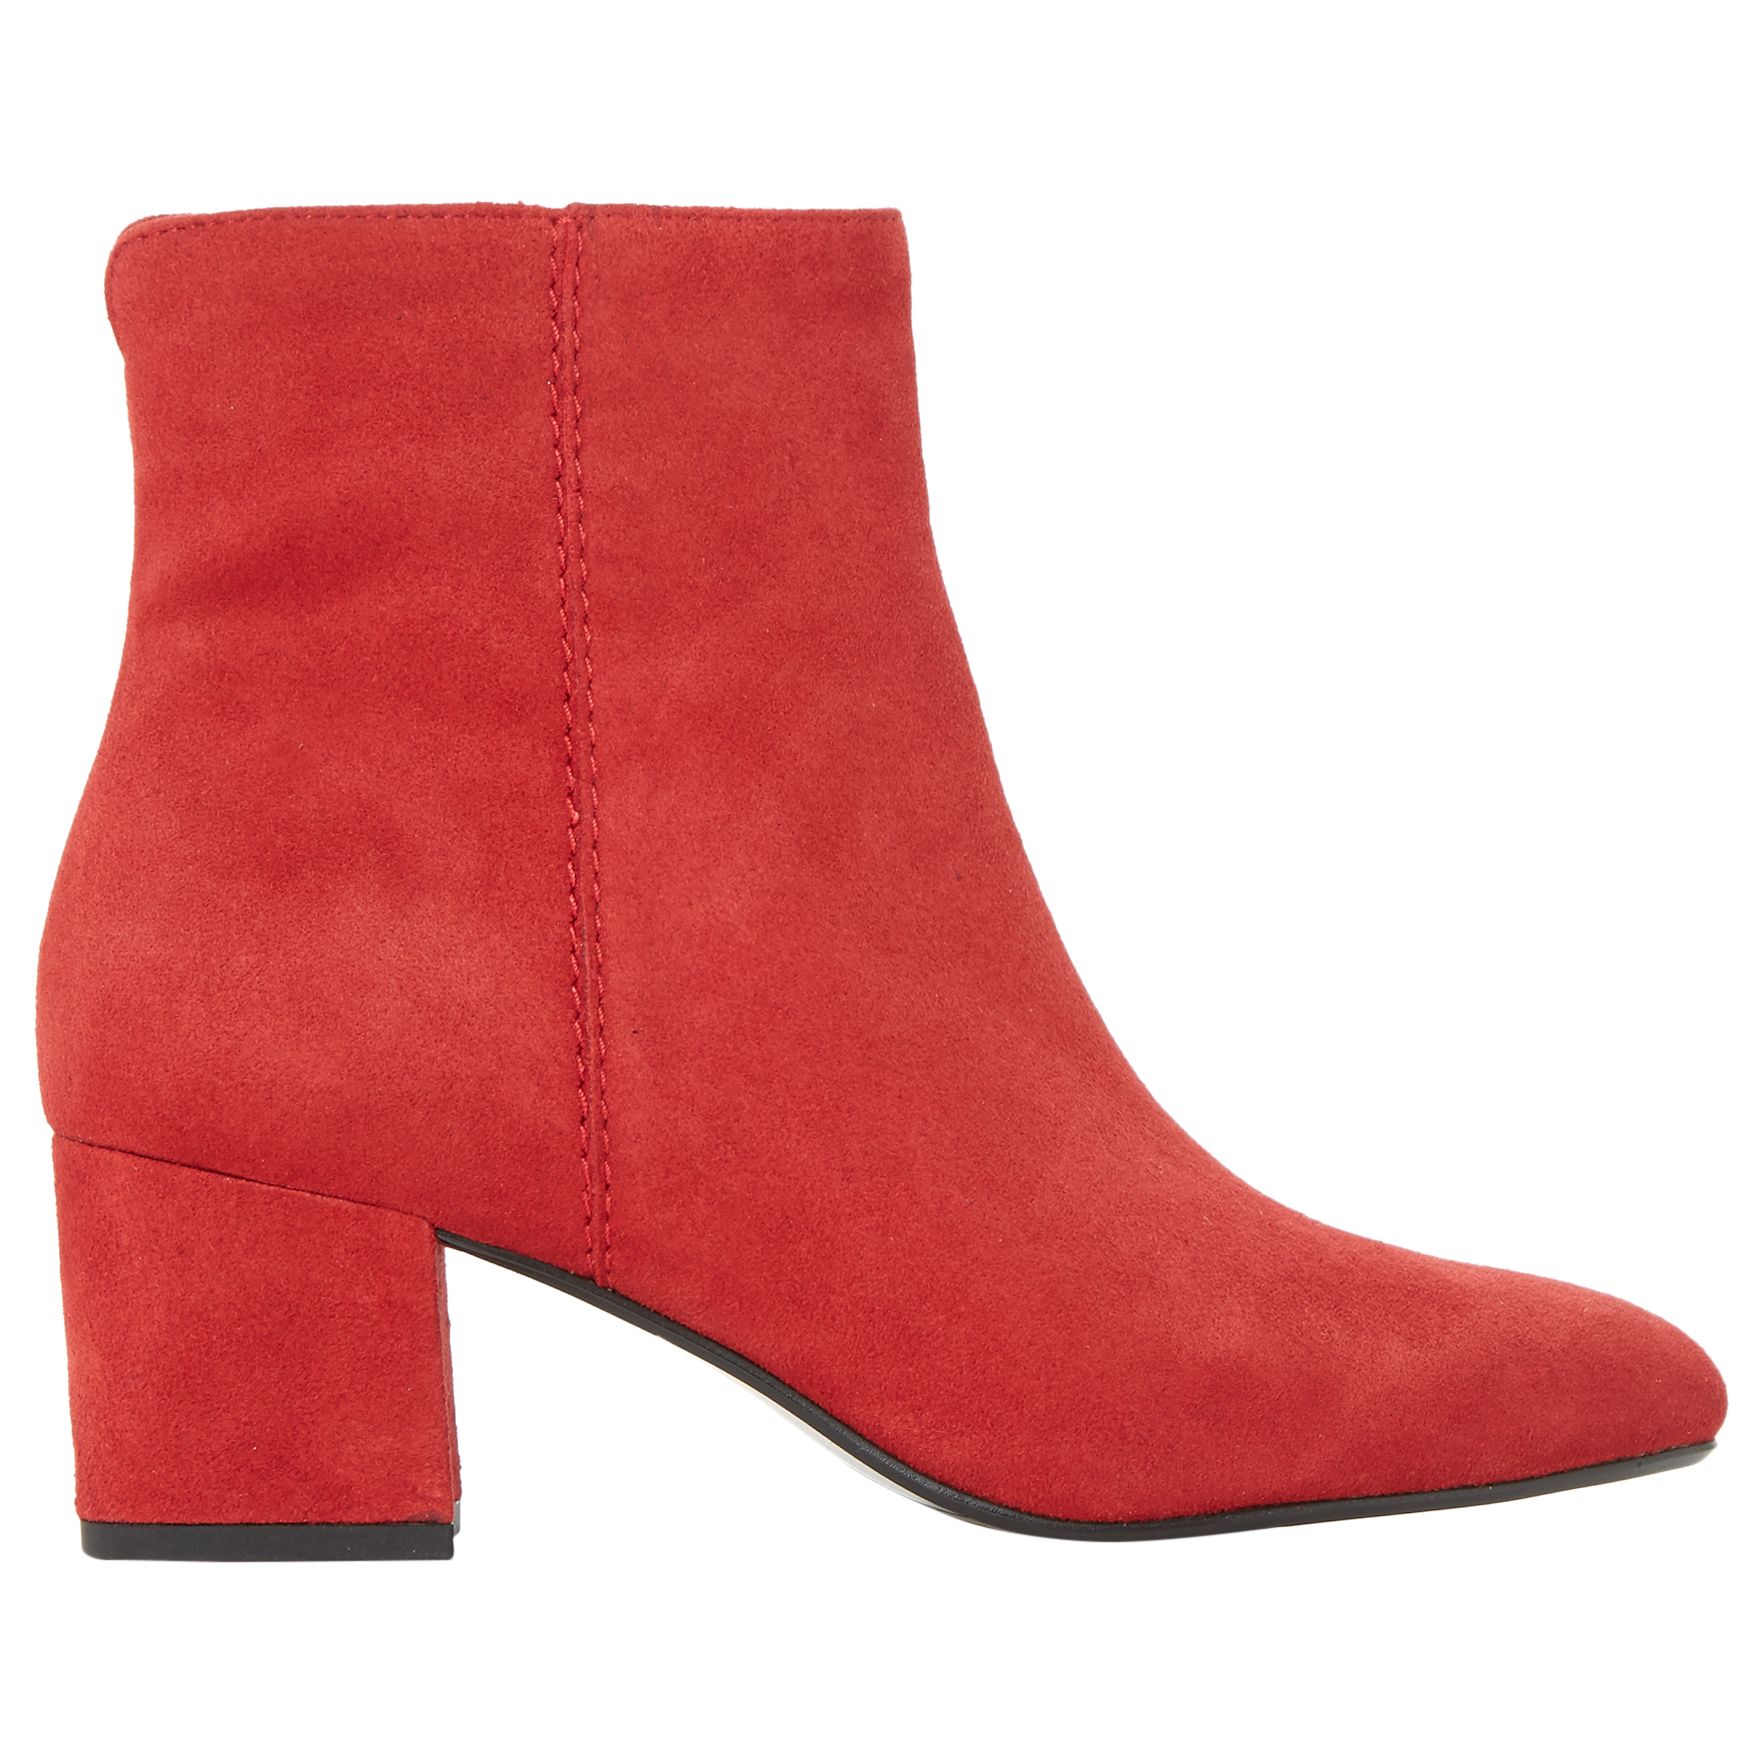 Dune Olyvea Block Heeled Ankle Boots, Red Suede, 4